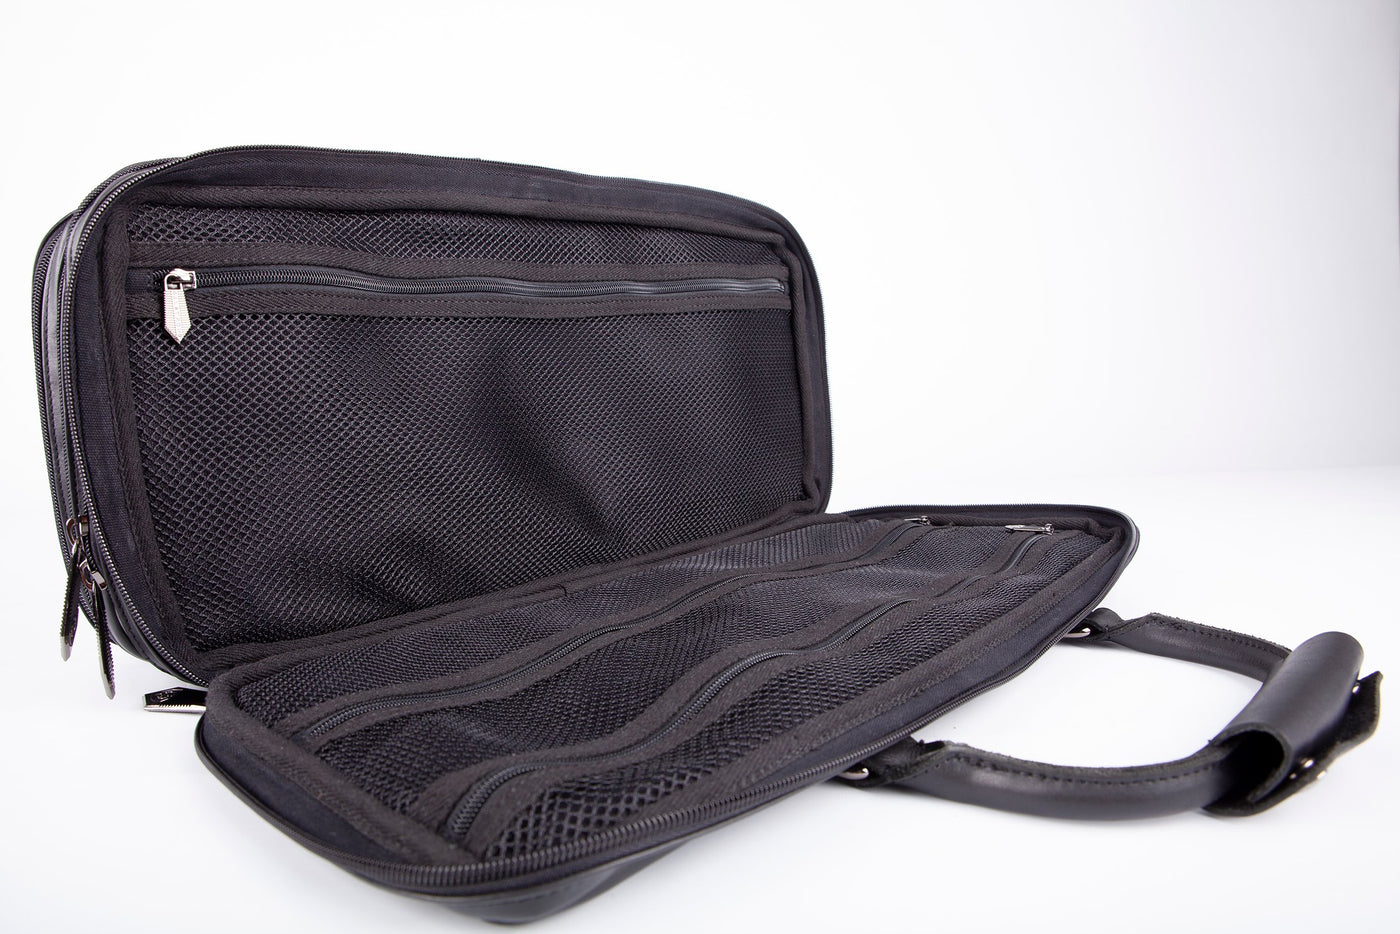 Premium 4 Pocket Knife Bag | The Culinary Commander | Dalstrong ©